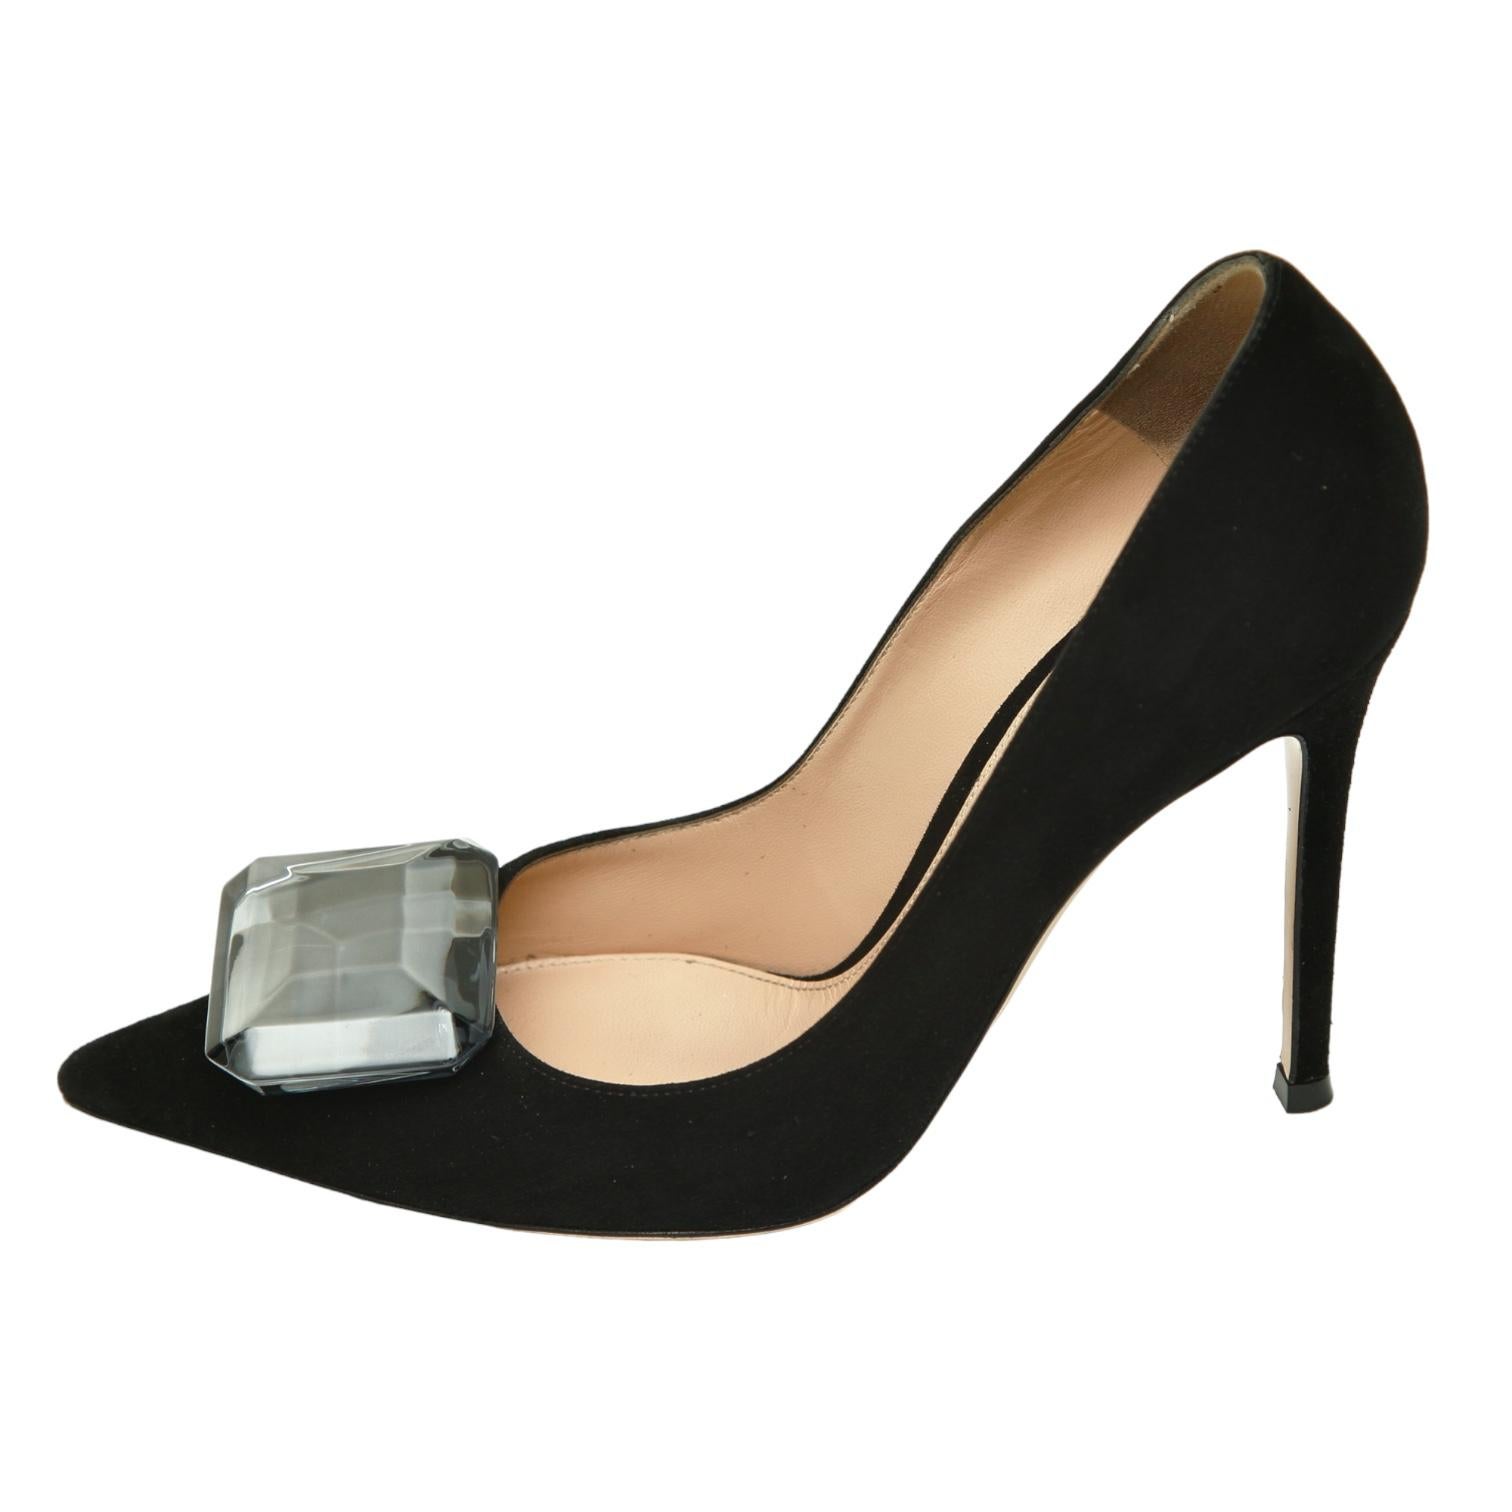 Women's GIANVITO ROSSI Black Suede Leather Pump JAIPUR Crystal Pointed Toe 38 $1200 For Sale